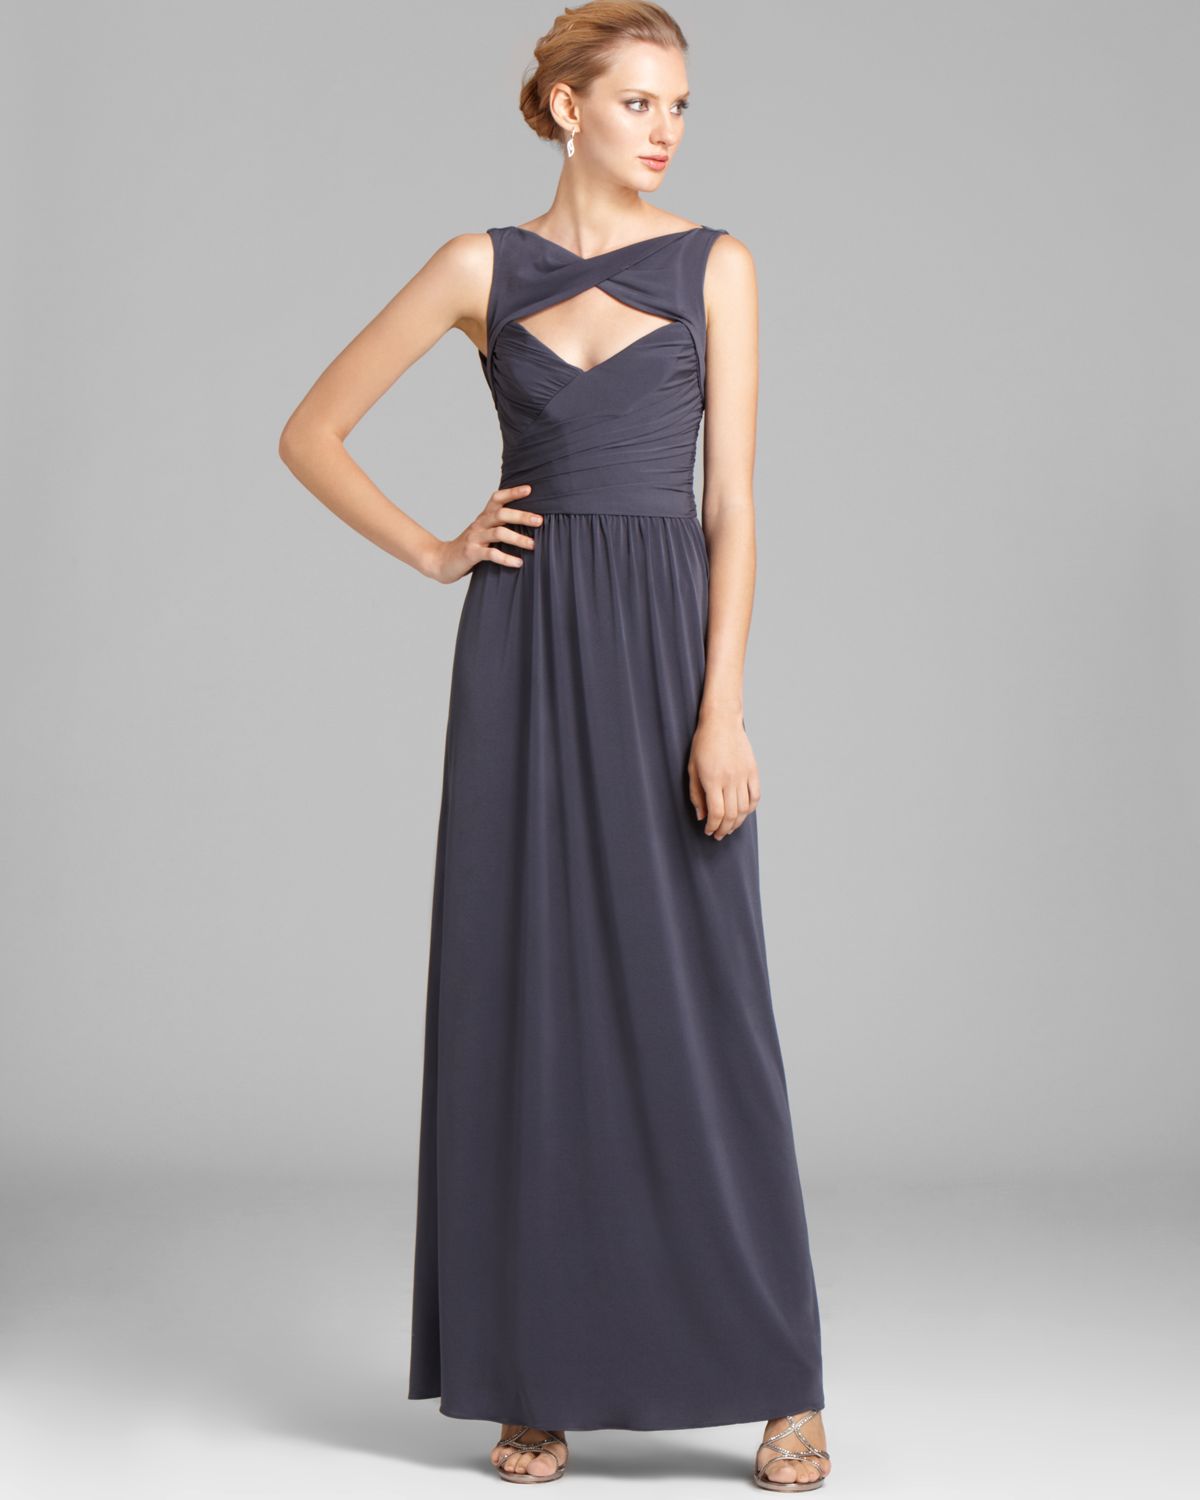 Lyst - Amsale Jersey Cutout Gown in Gray